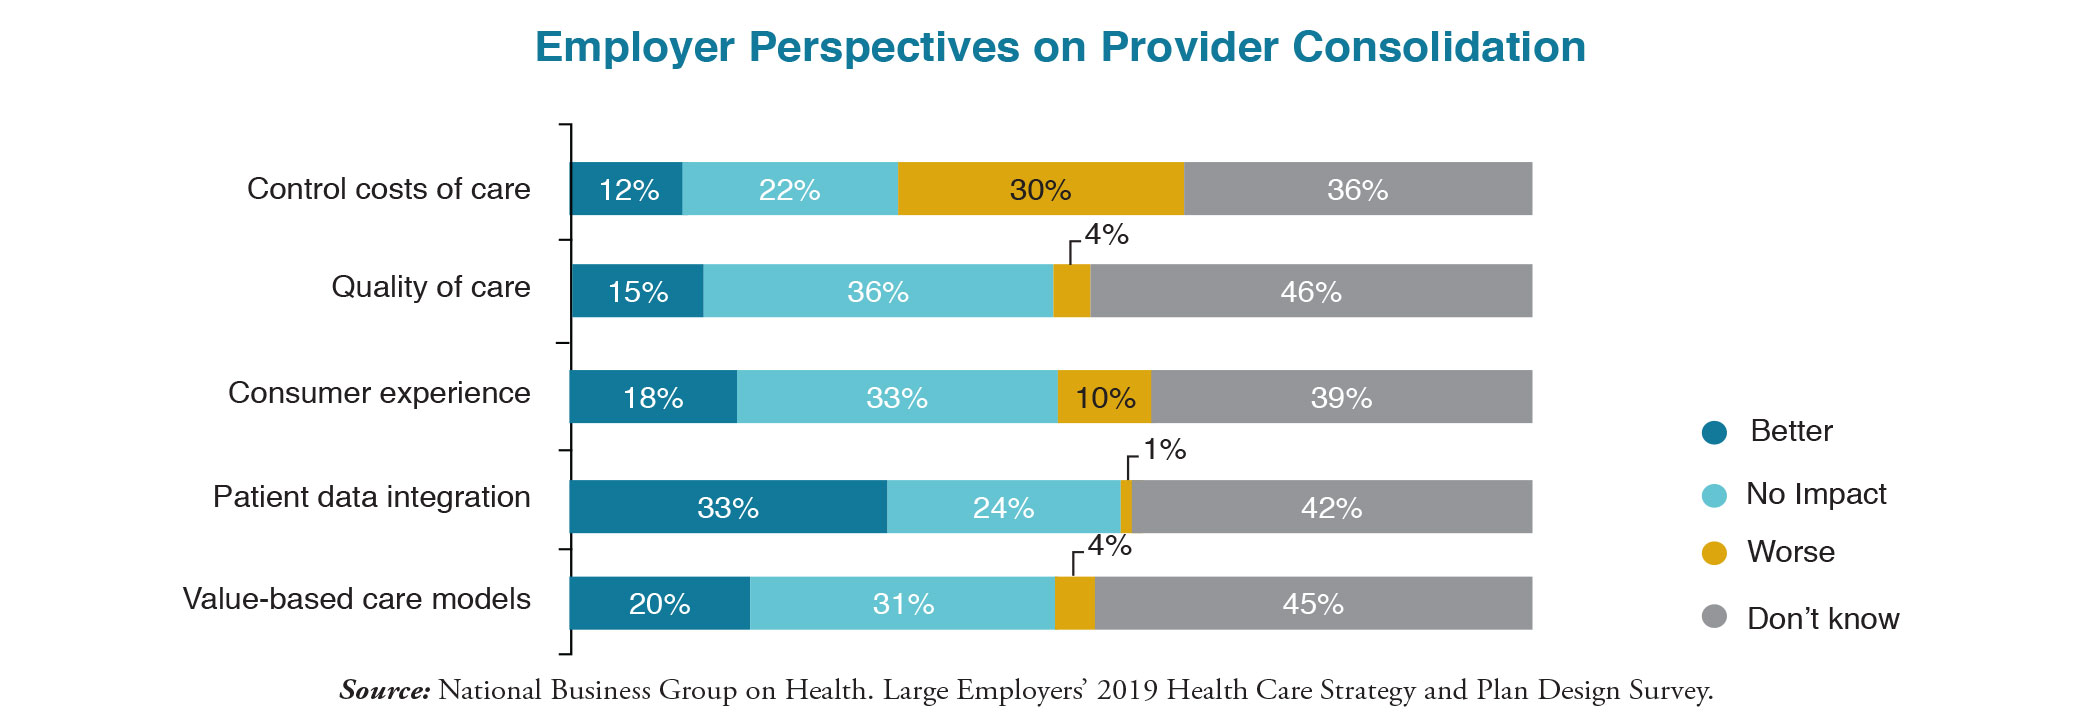 Employer Perspectives on Provider Consolidation